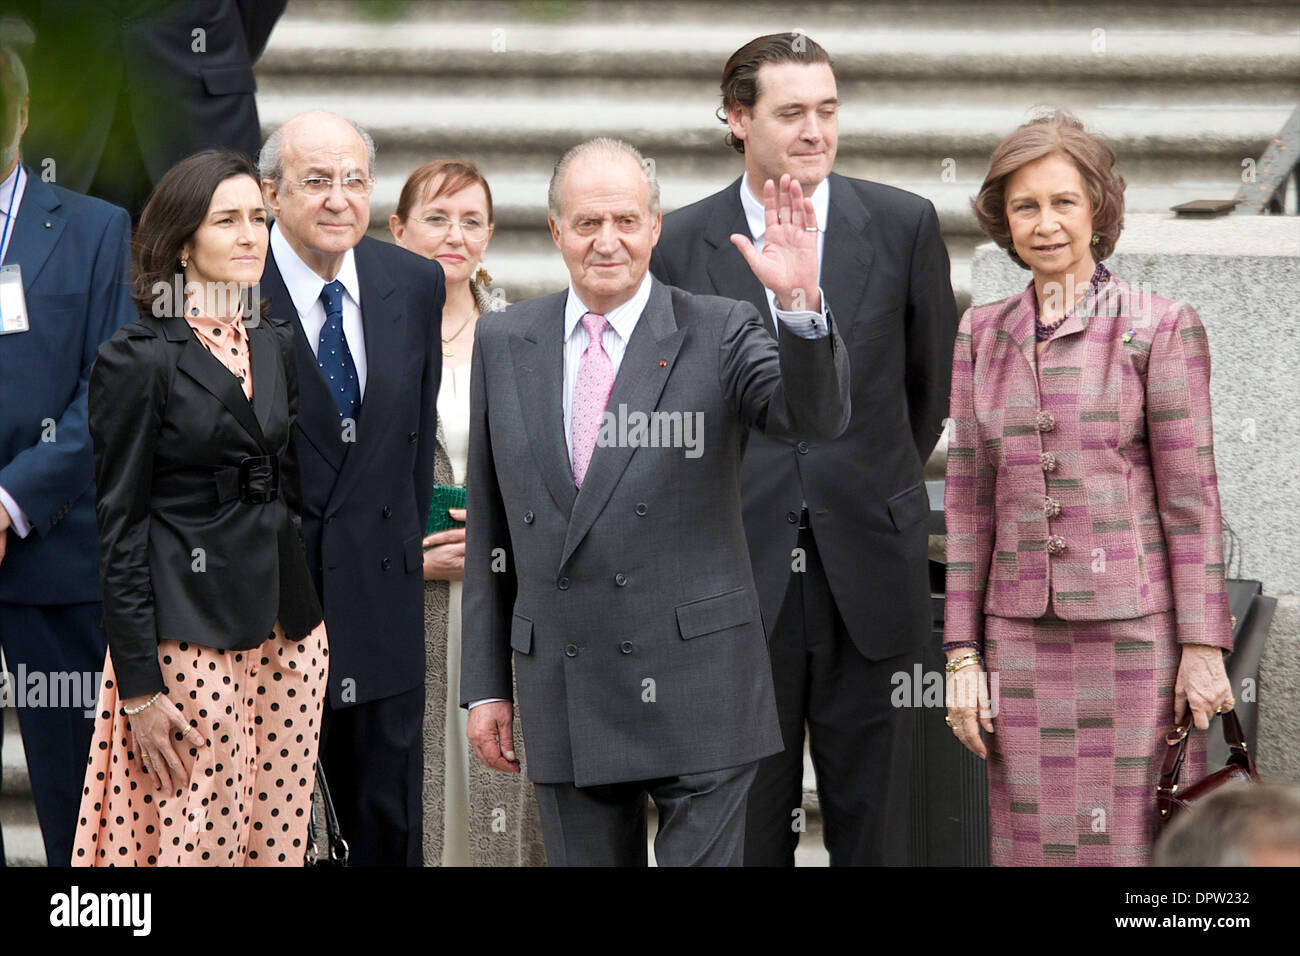 Apr 27, 2009 - Madrid, Spain - The Prado Museum. French President Sarkozy  and his wife visit the El Prado Museum with Spain's KING JUAN CARLOS I, center, and QUEEN SOFIA, right.  (Credit Image: © Jose Perez Gegundez/ZUMA Press) RESTRICTIONS: * Spain Rights OUT * Stock Photo